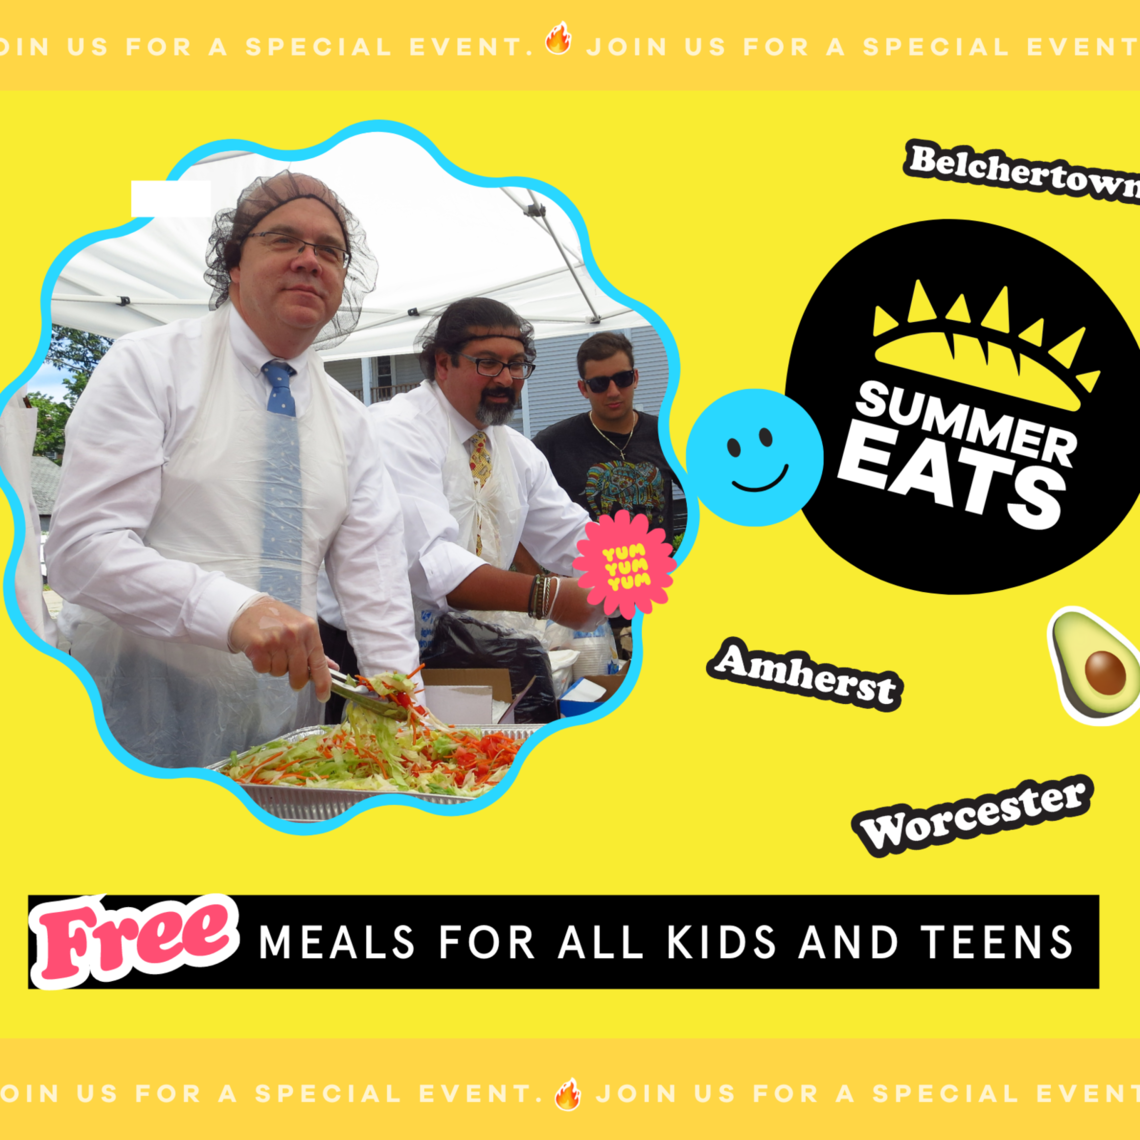 Celebrate Summer Eats with Congressman McGovern July 7, 2022